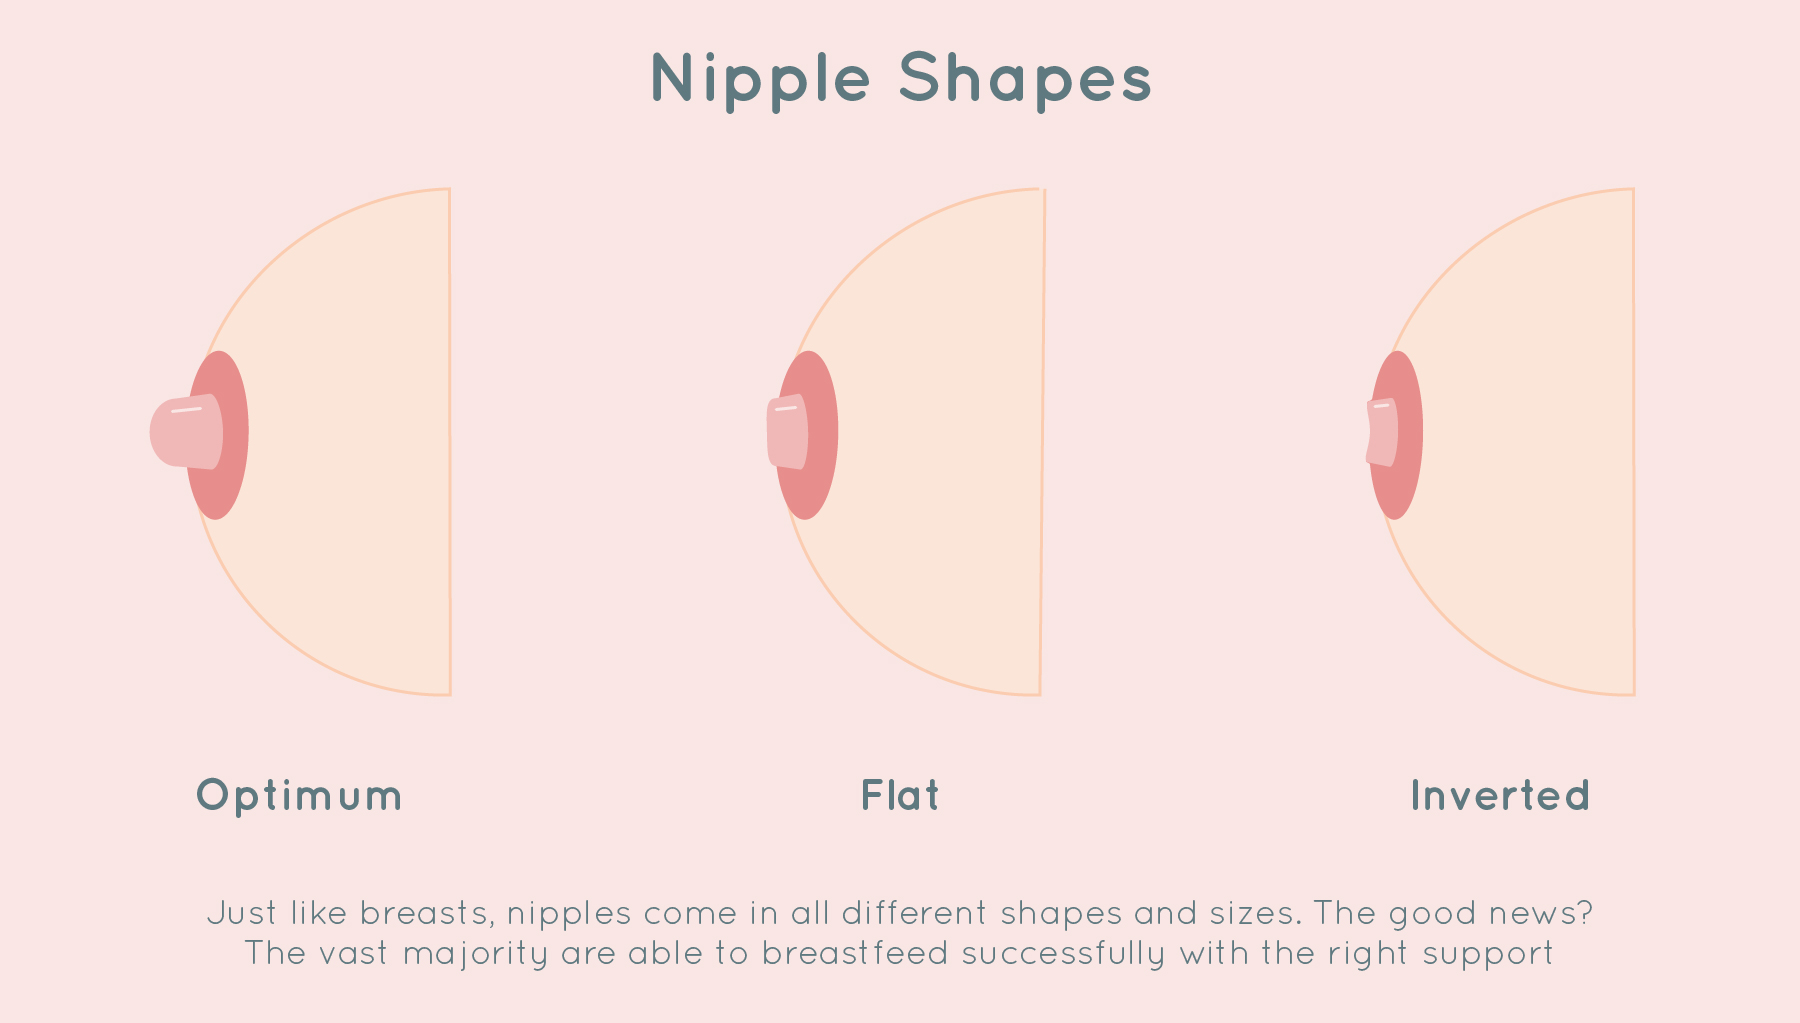 5 Tips For Breastfeeding With Inverted Nipples